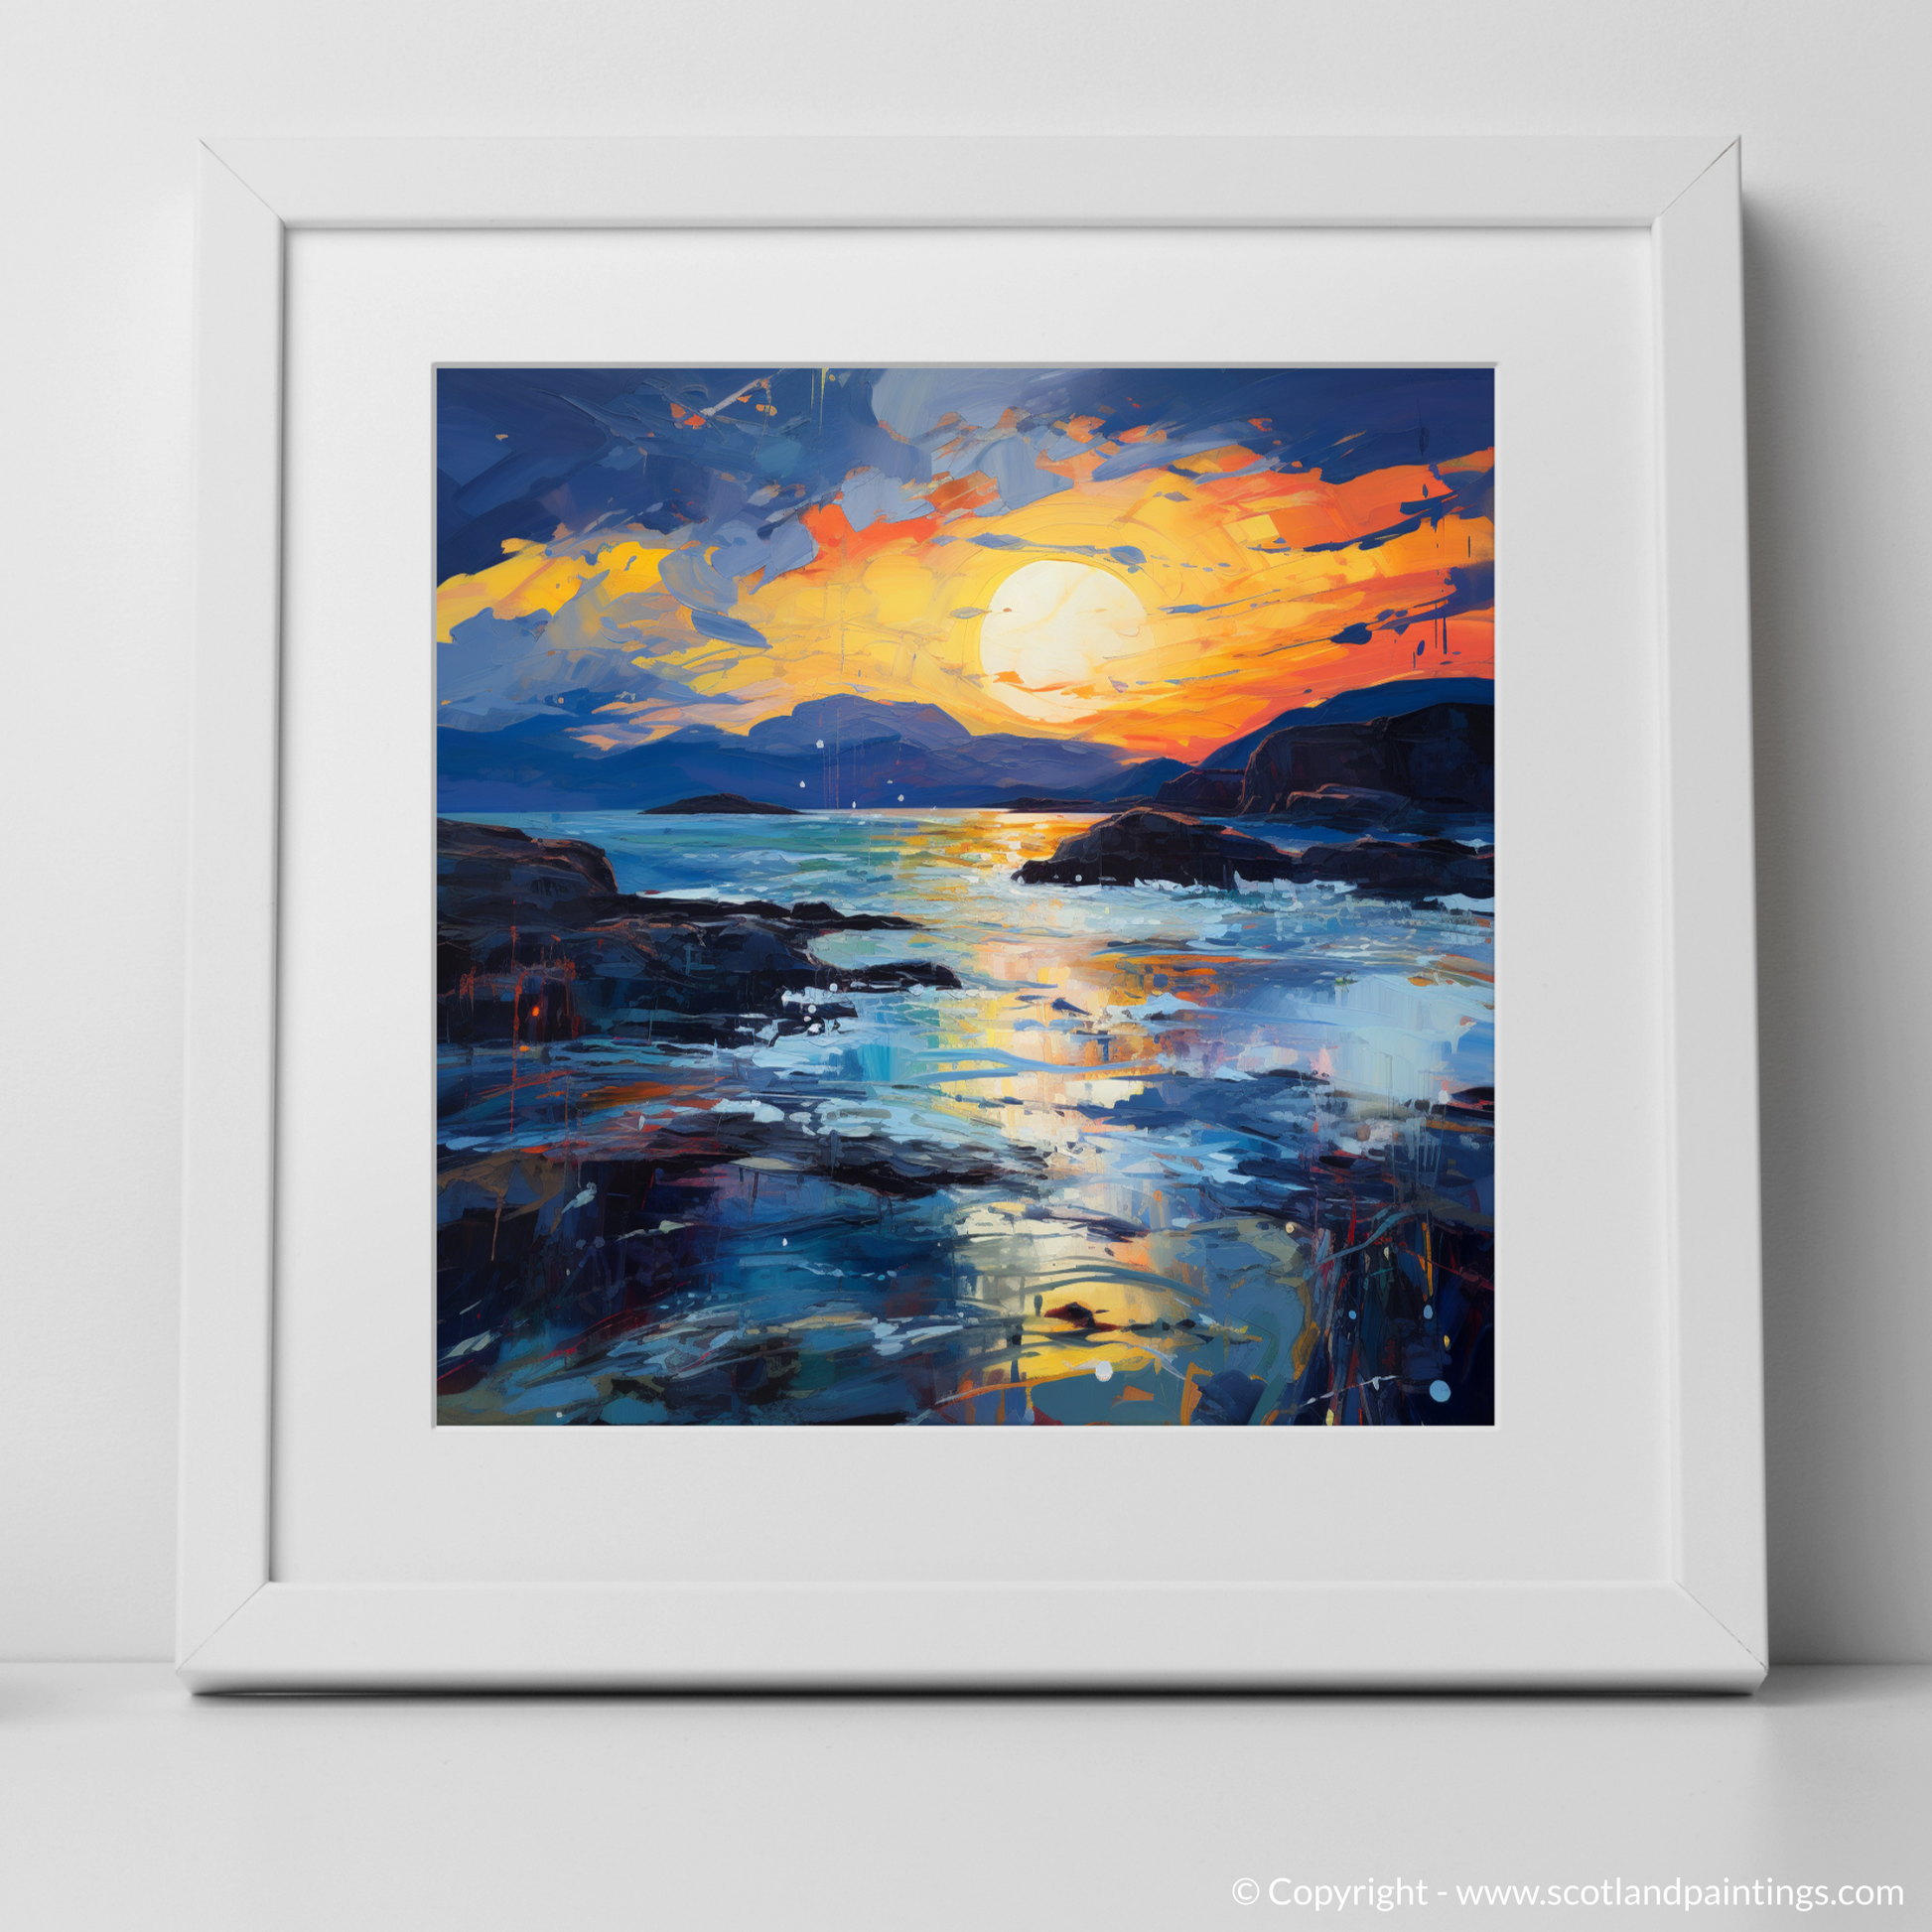 Art Print of Sound of Iona at dusk with a white frame